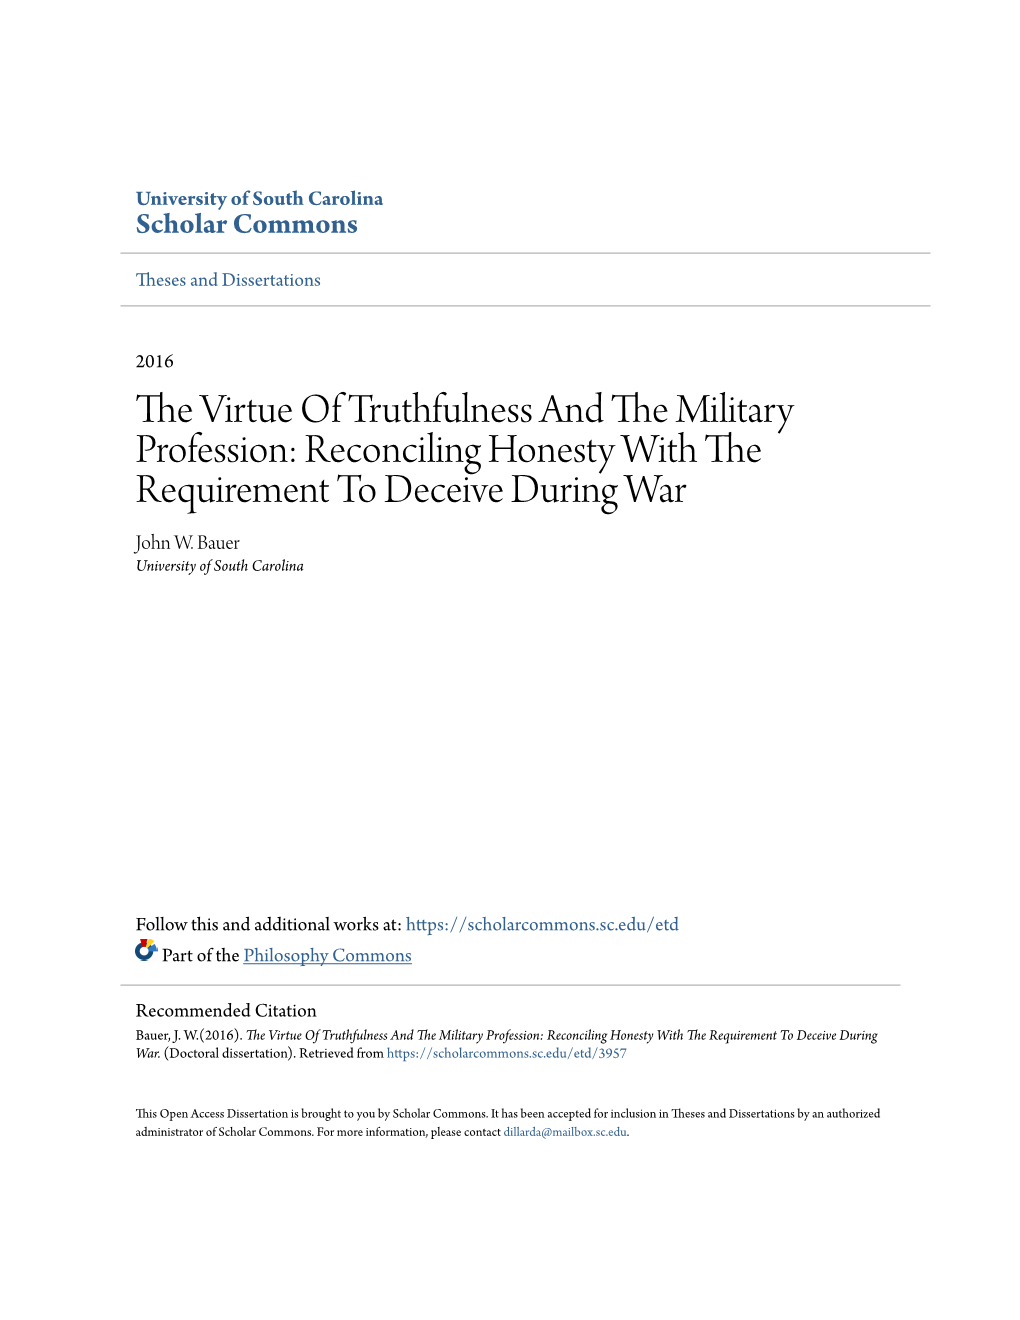 The Virtue of Truthfulness and the Military Profession: Reconciling Honesty with the Requirement to Deceive During War